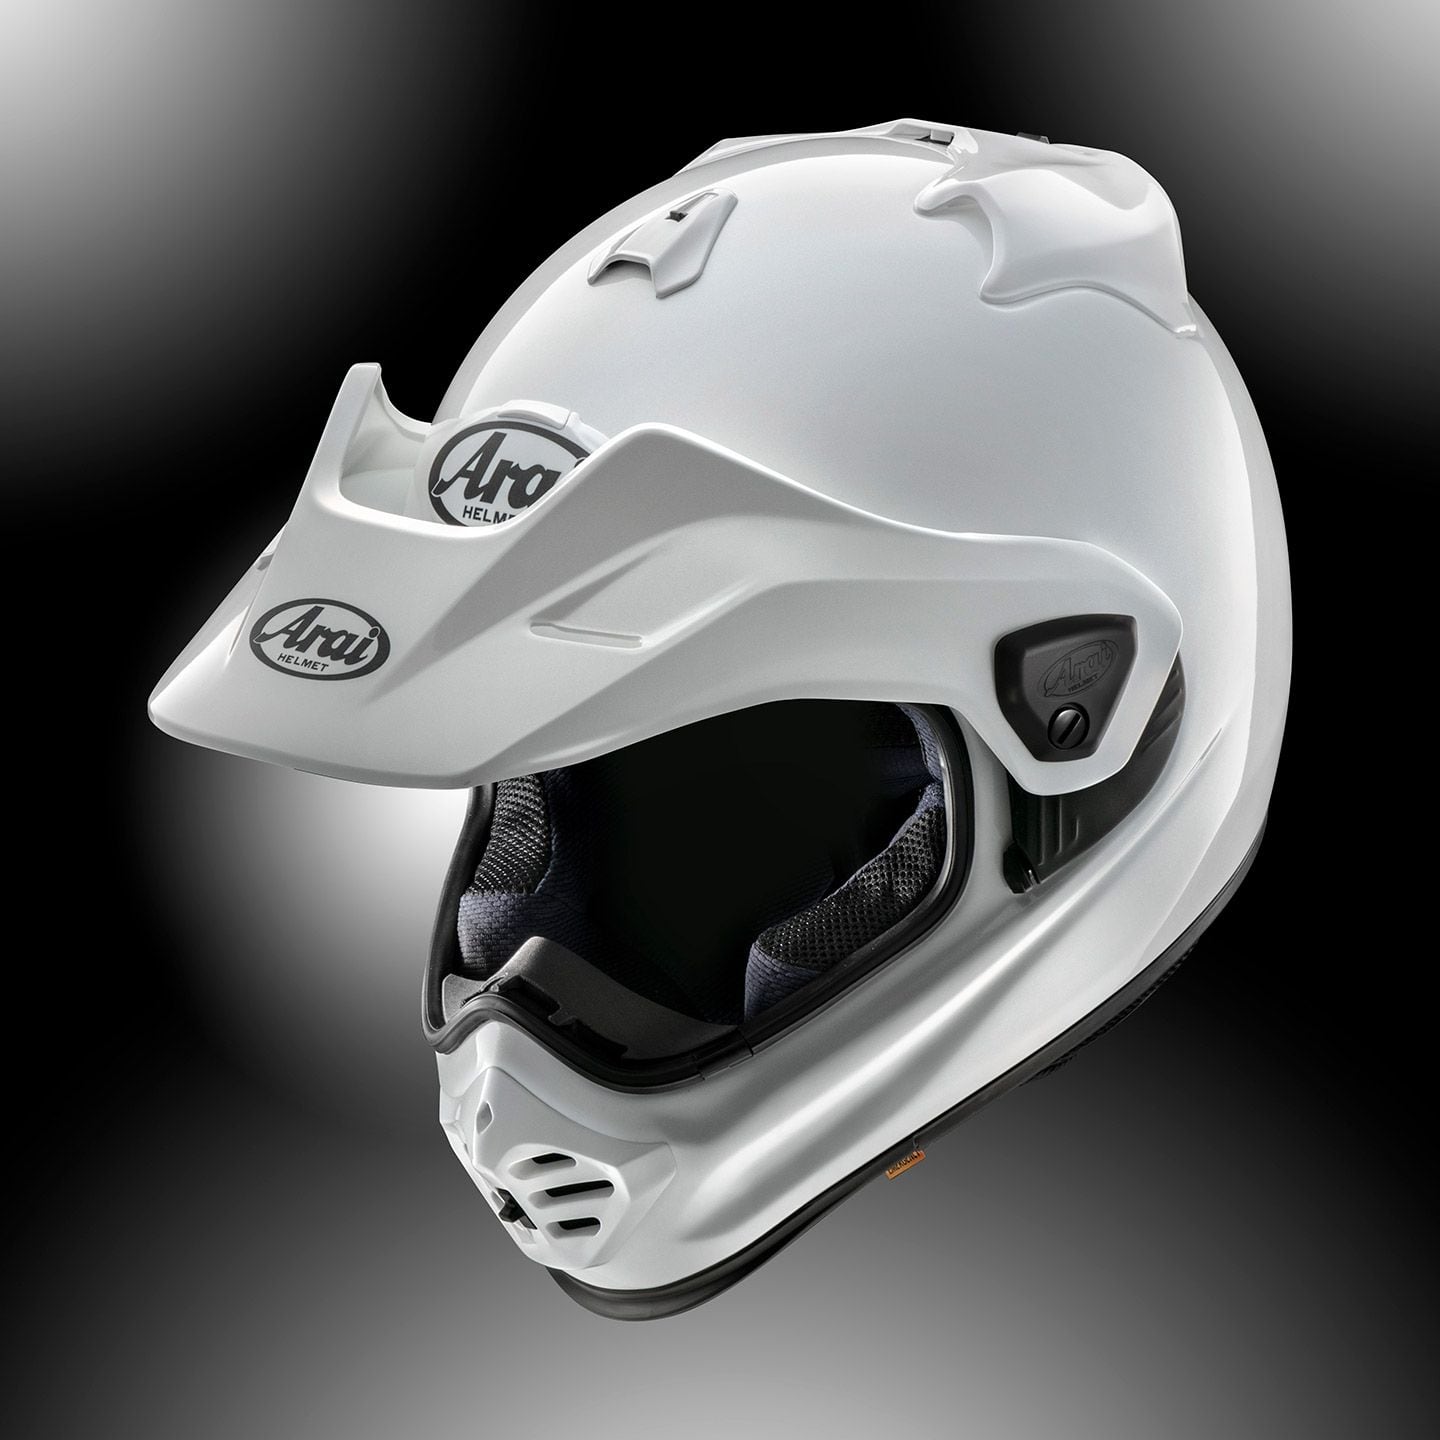 Ditch the face shield, replace with goggles, and you’re ready to take the XD-5 off-road.